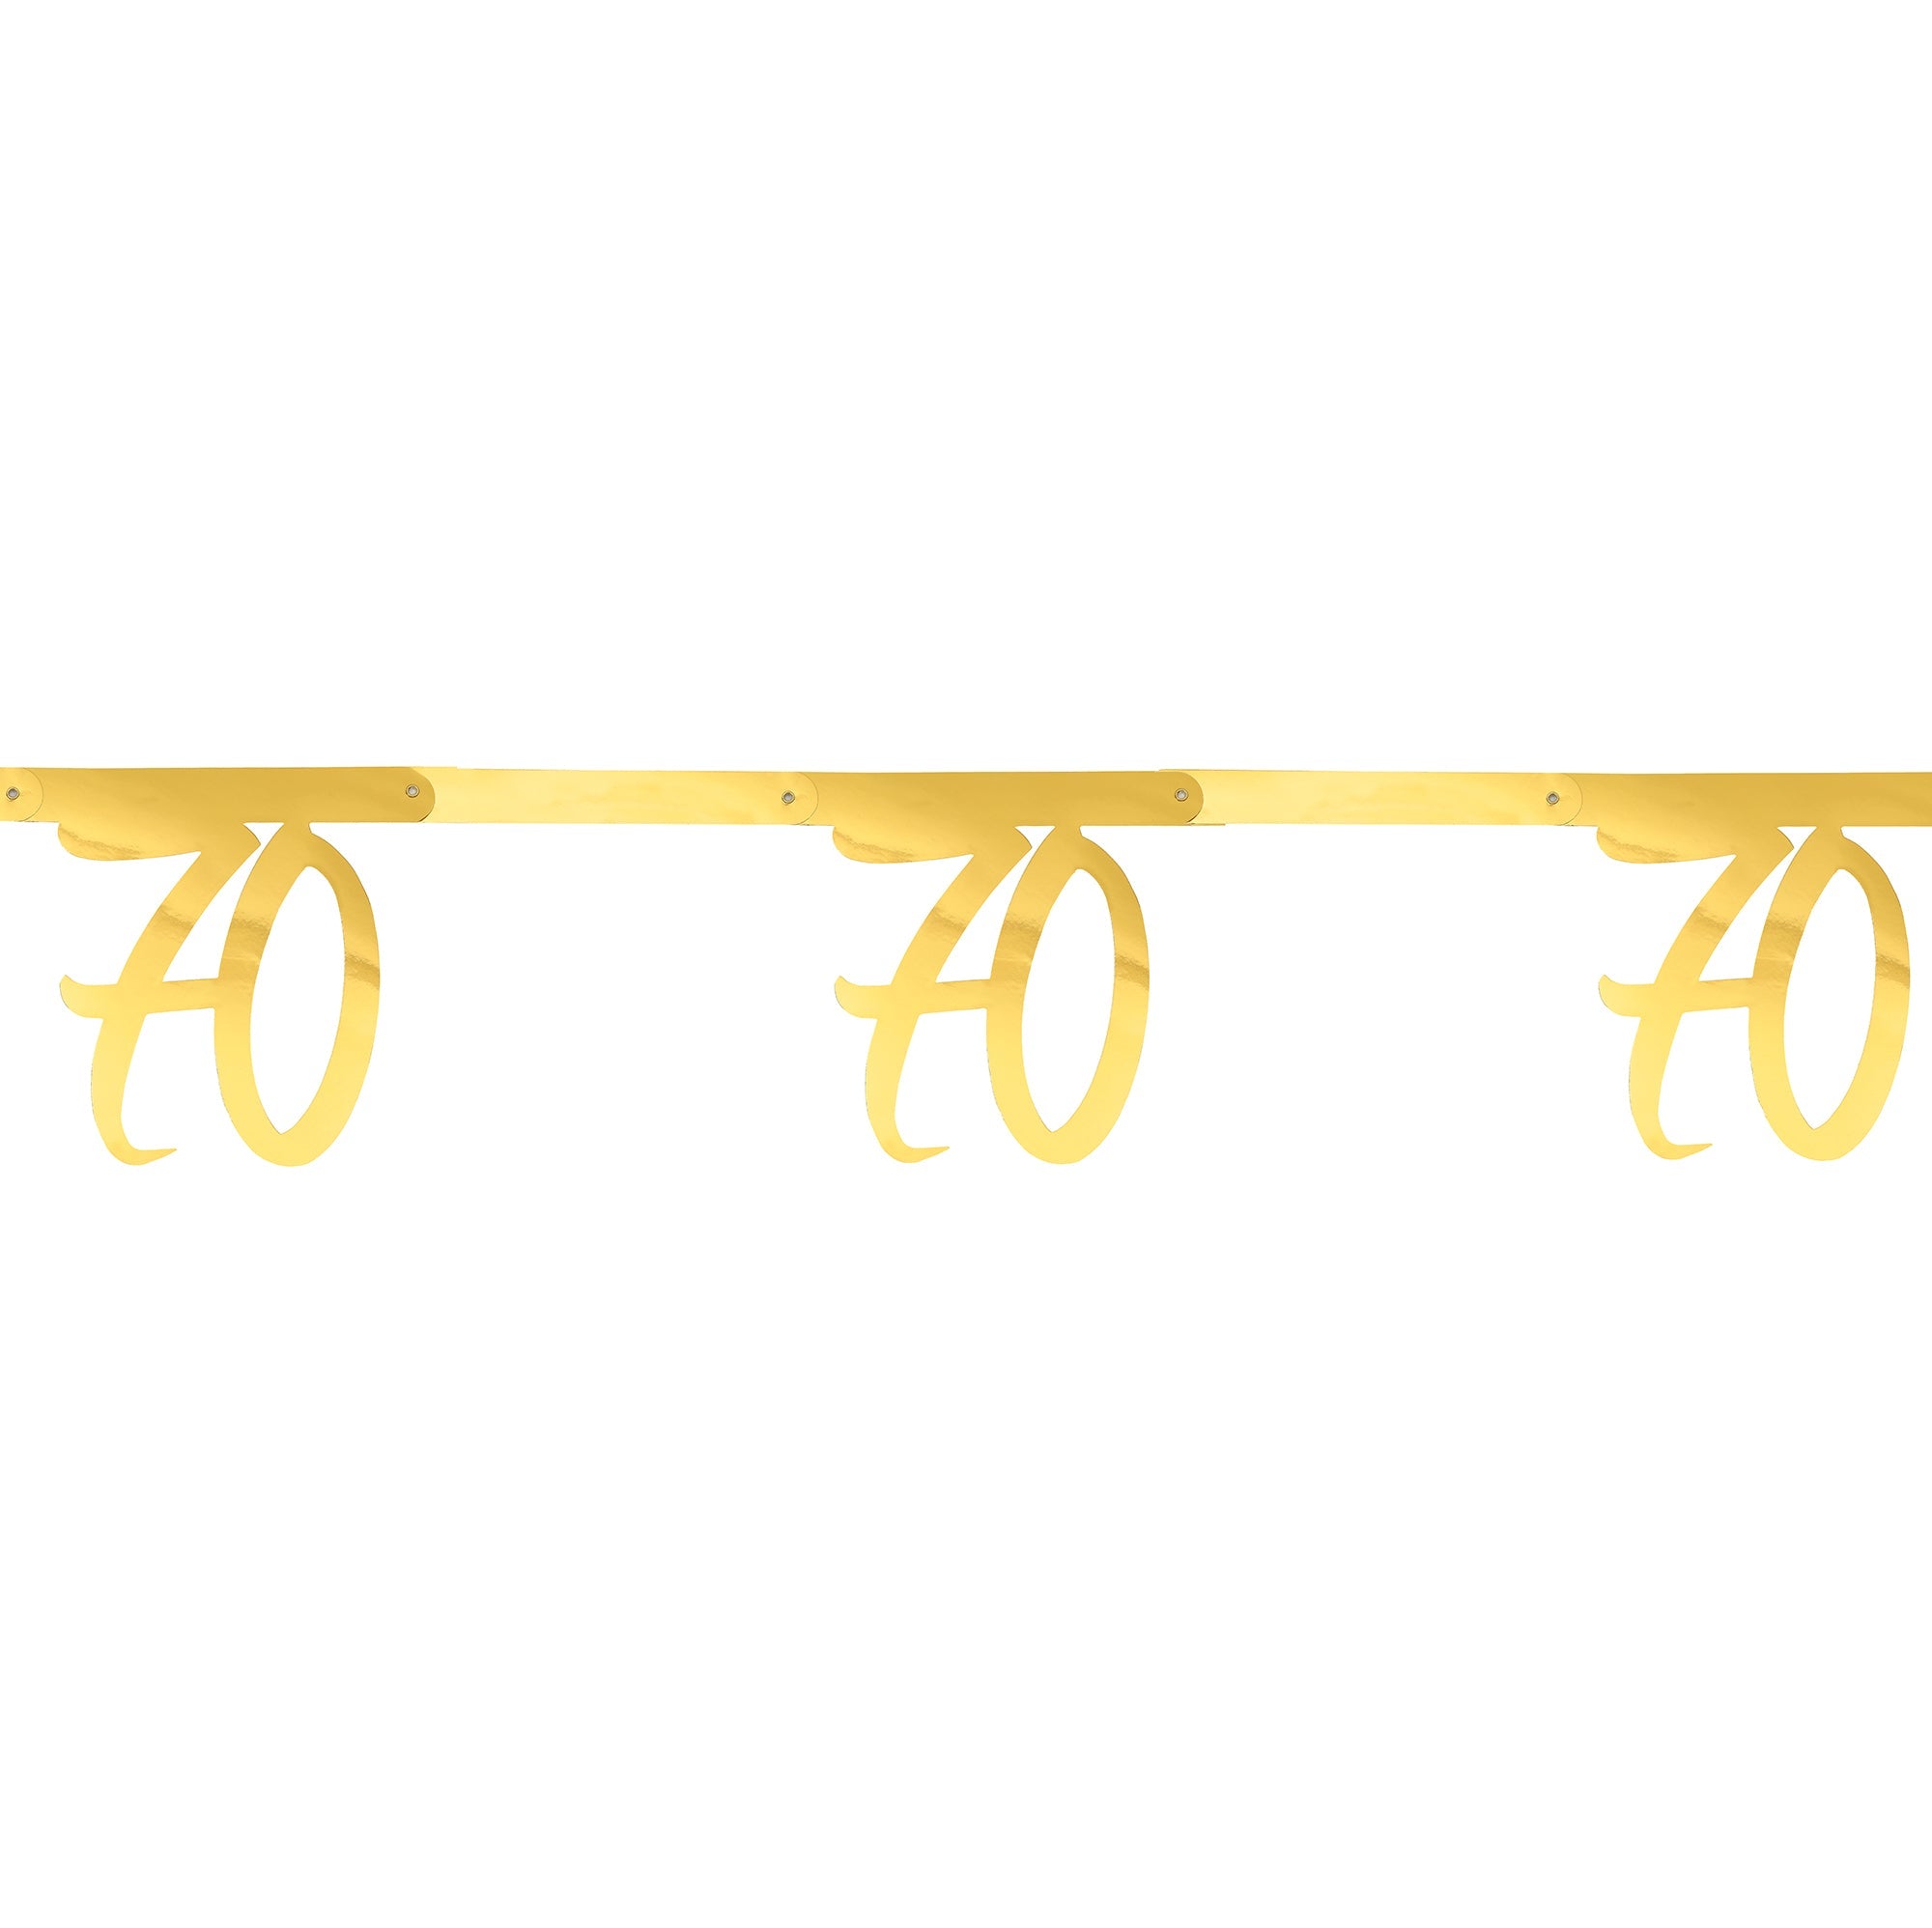 Age 70 Jointed Banner Gold Metallic 8x98in